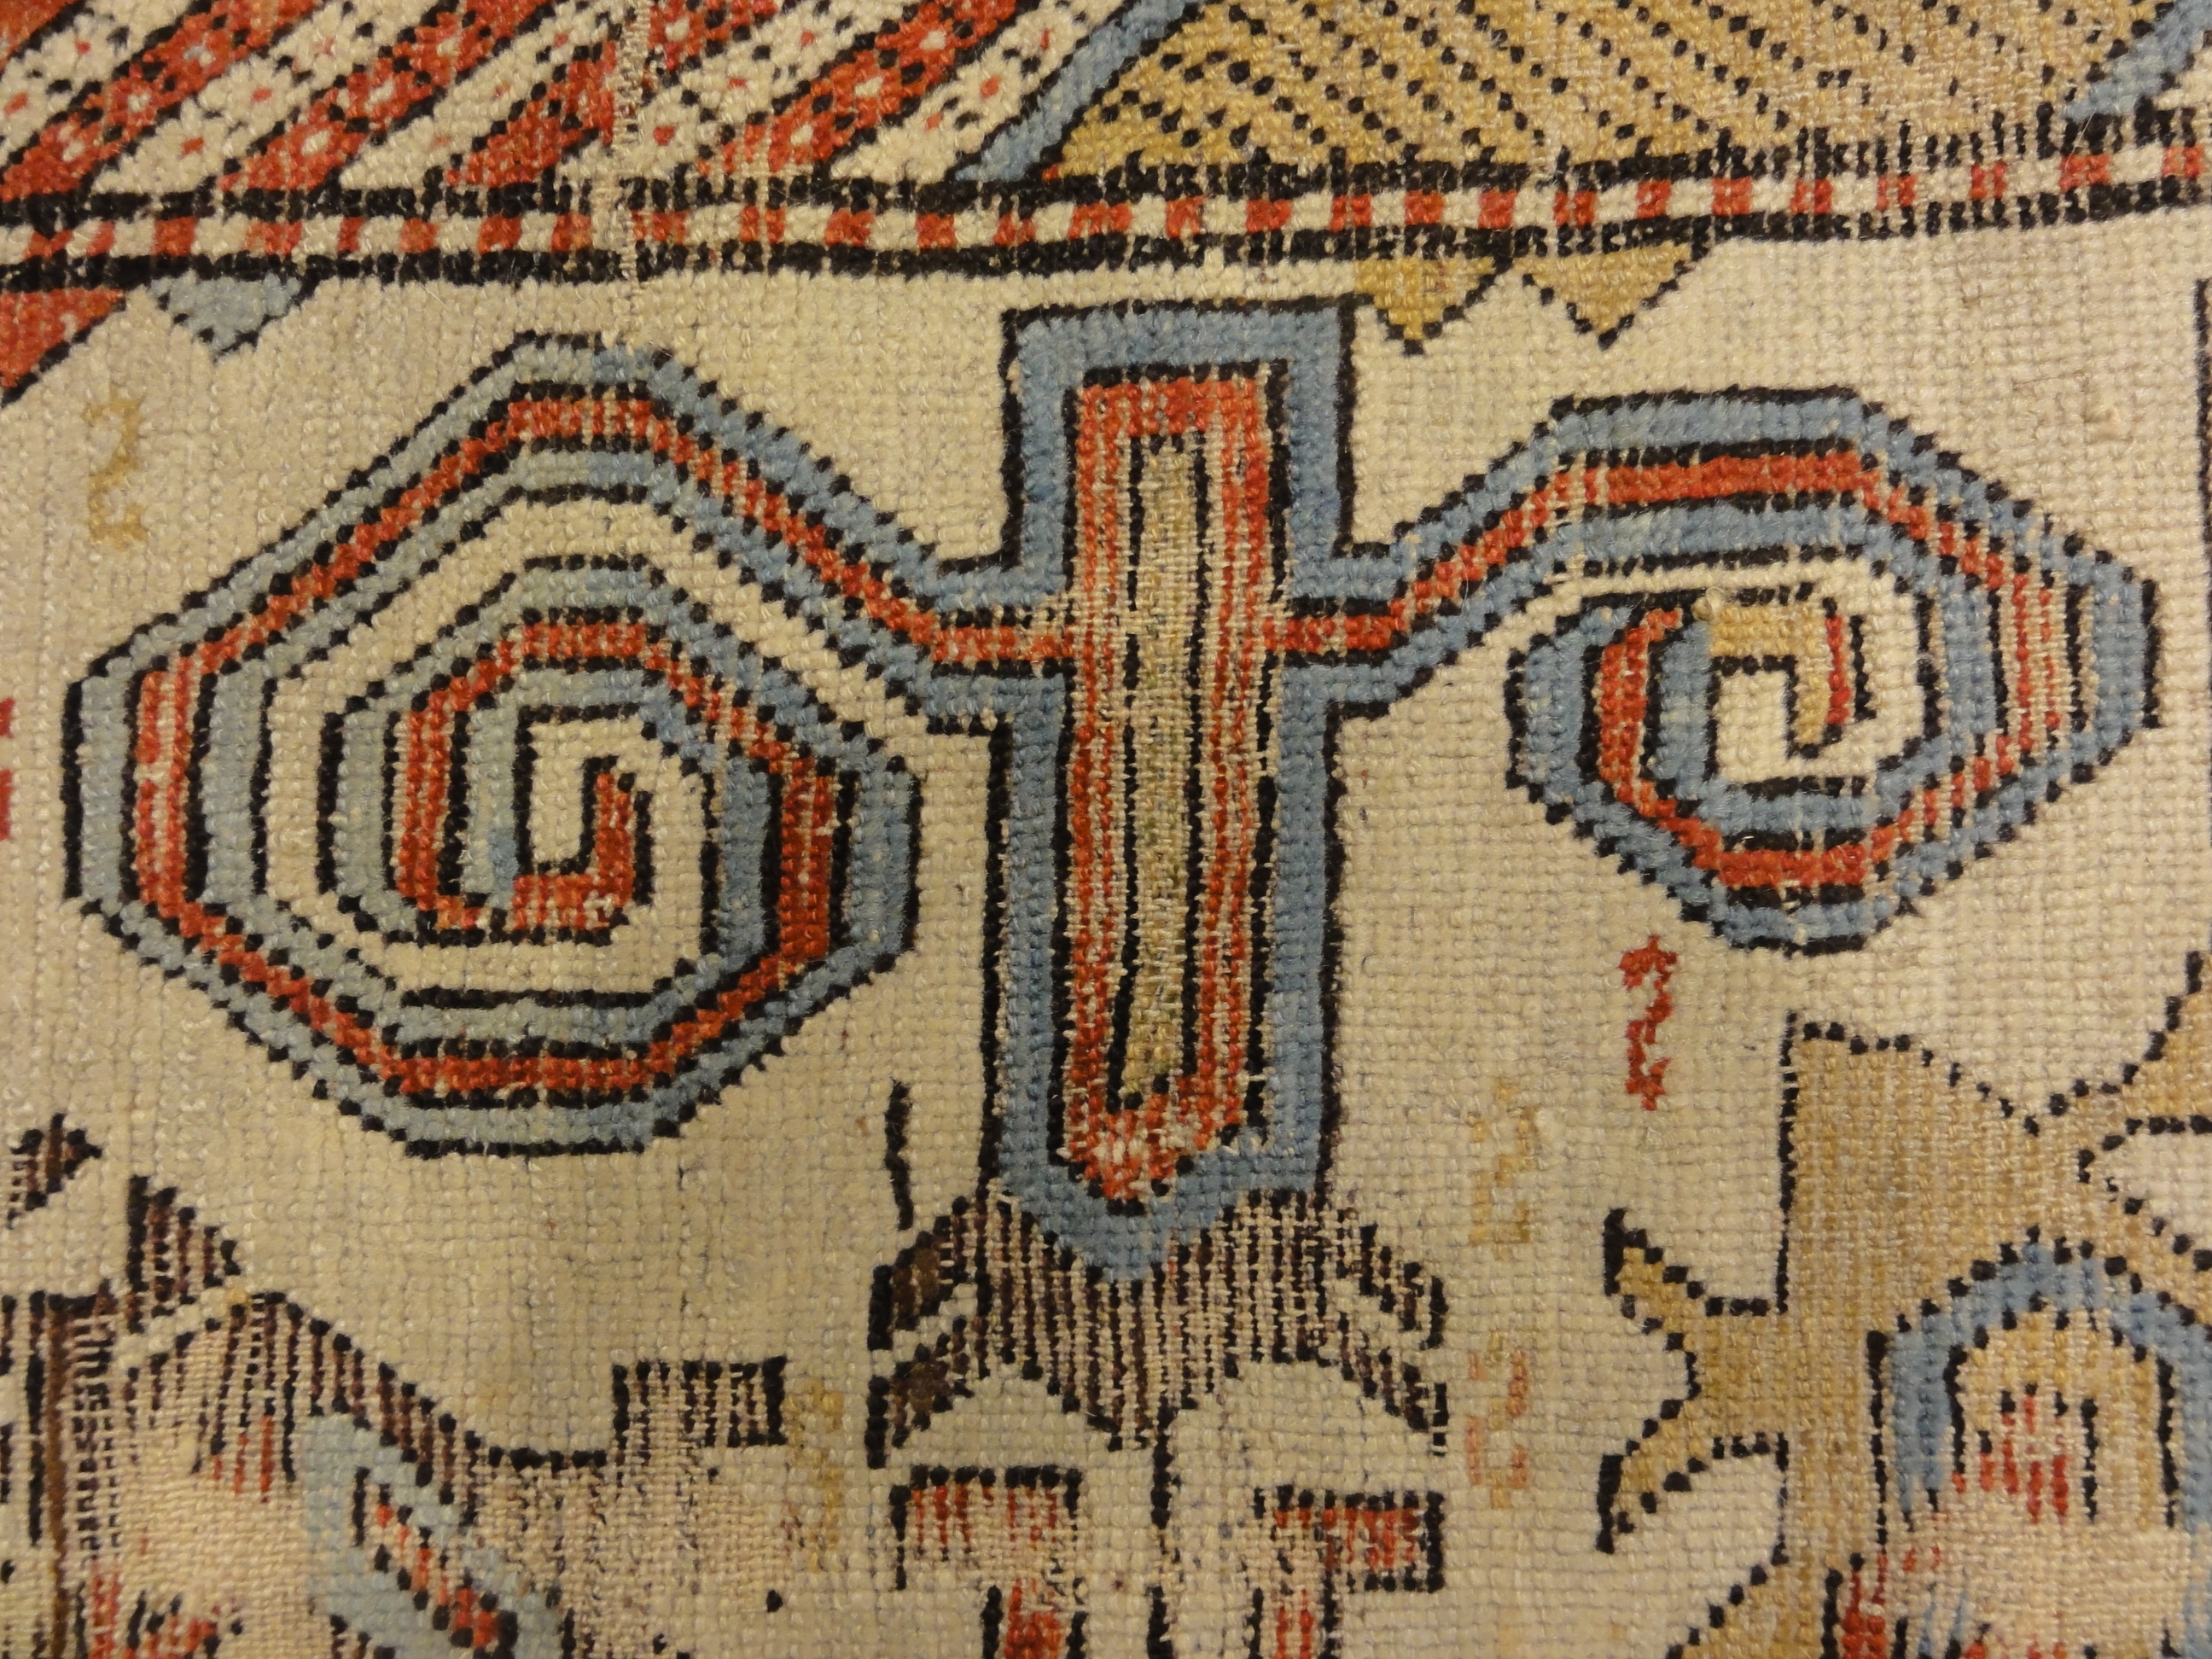 Antique Early Caucasian Proto Northern Kurdish Rug Circa 1700s. A piece of antique woven carpet art sold by Santa Barbara Design Center, Rugs and More.